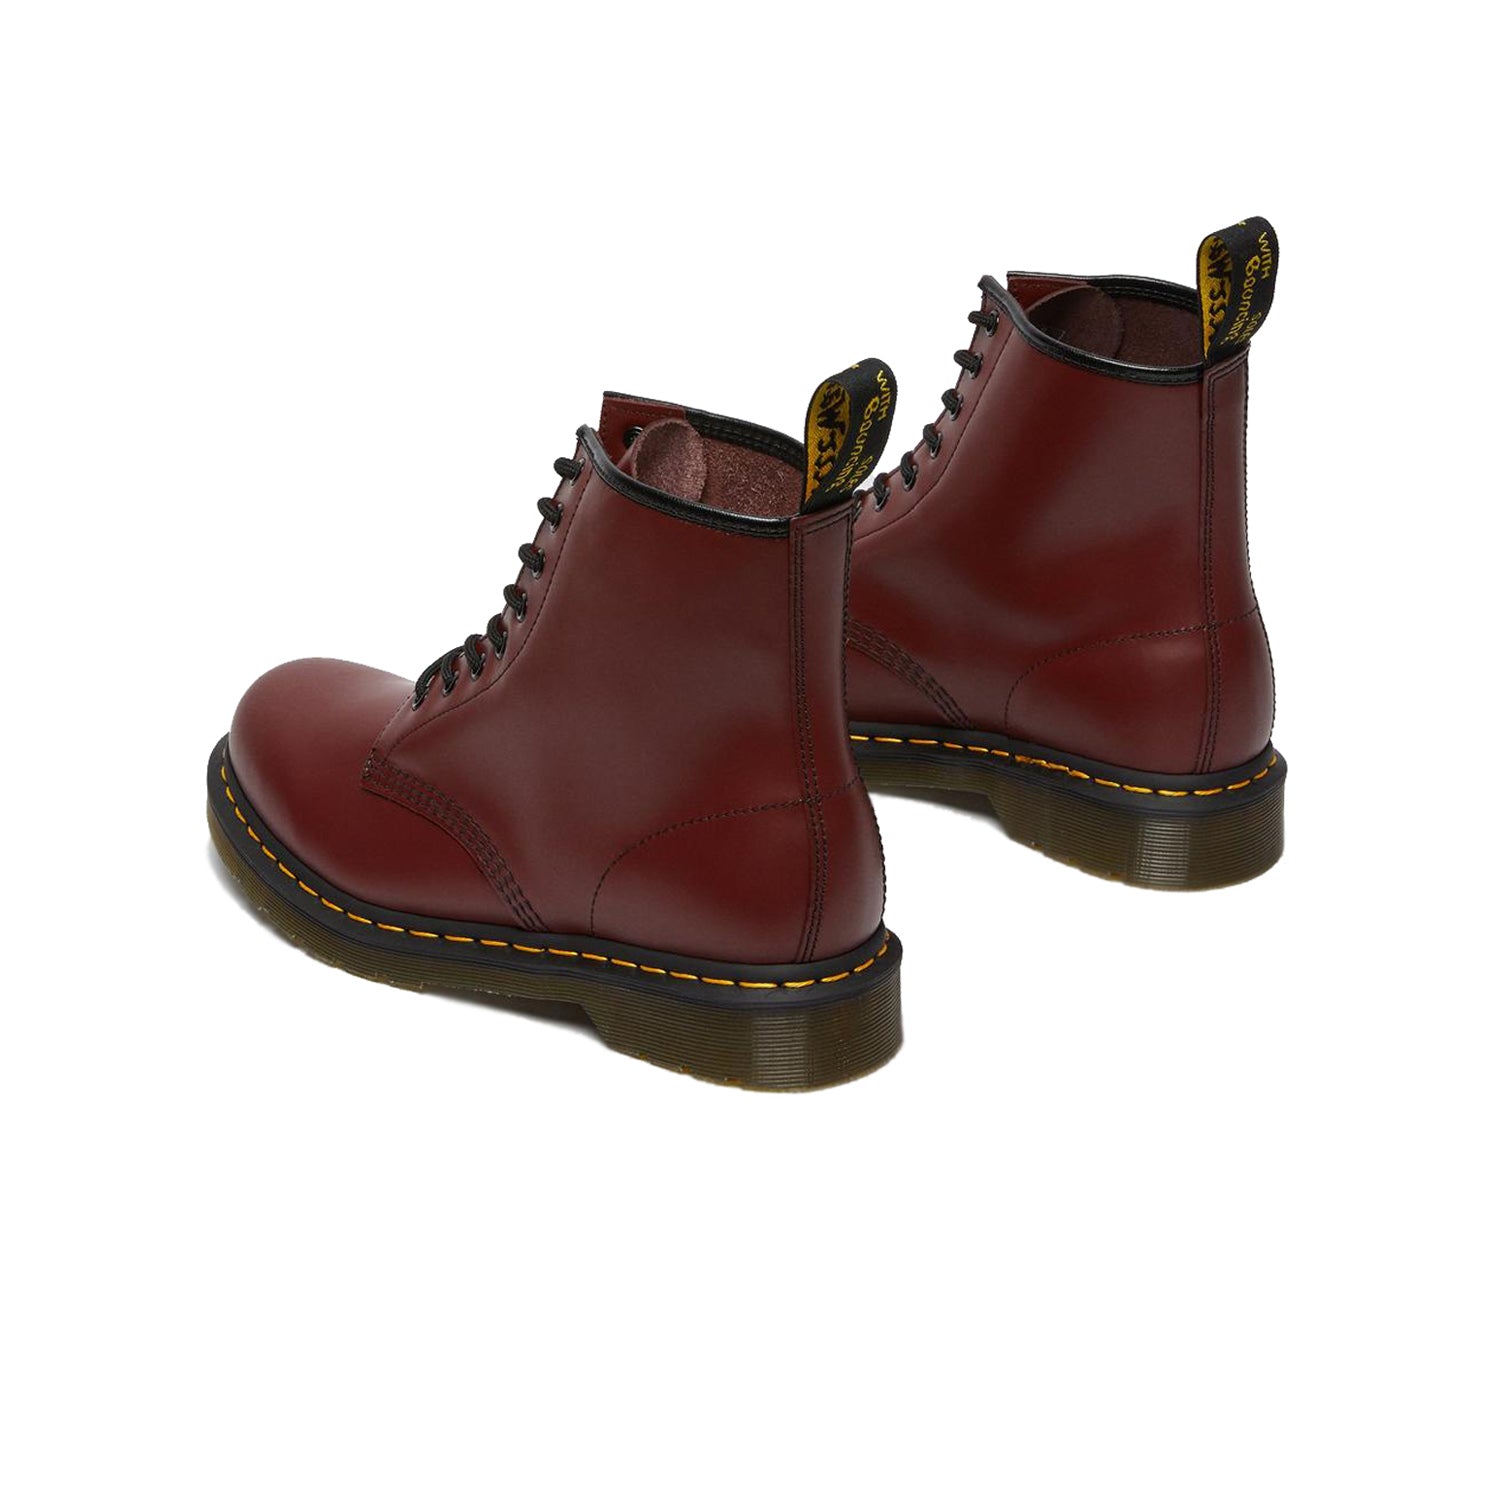 Dr. Martens 1460 Smooth Leather Ankle Boots Cherry Red